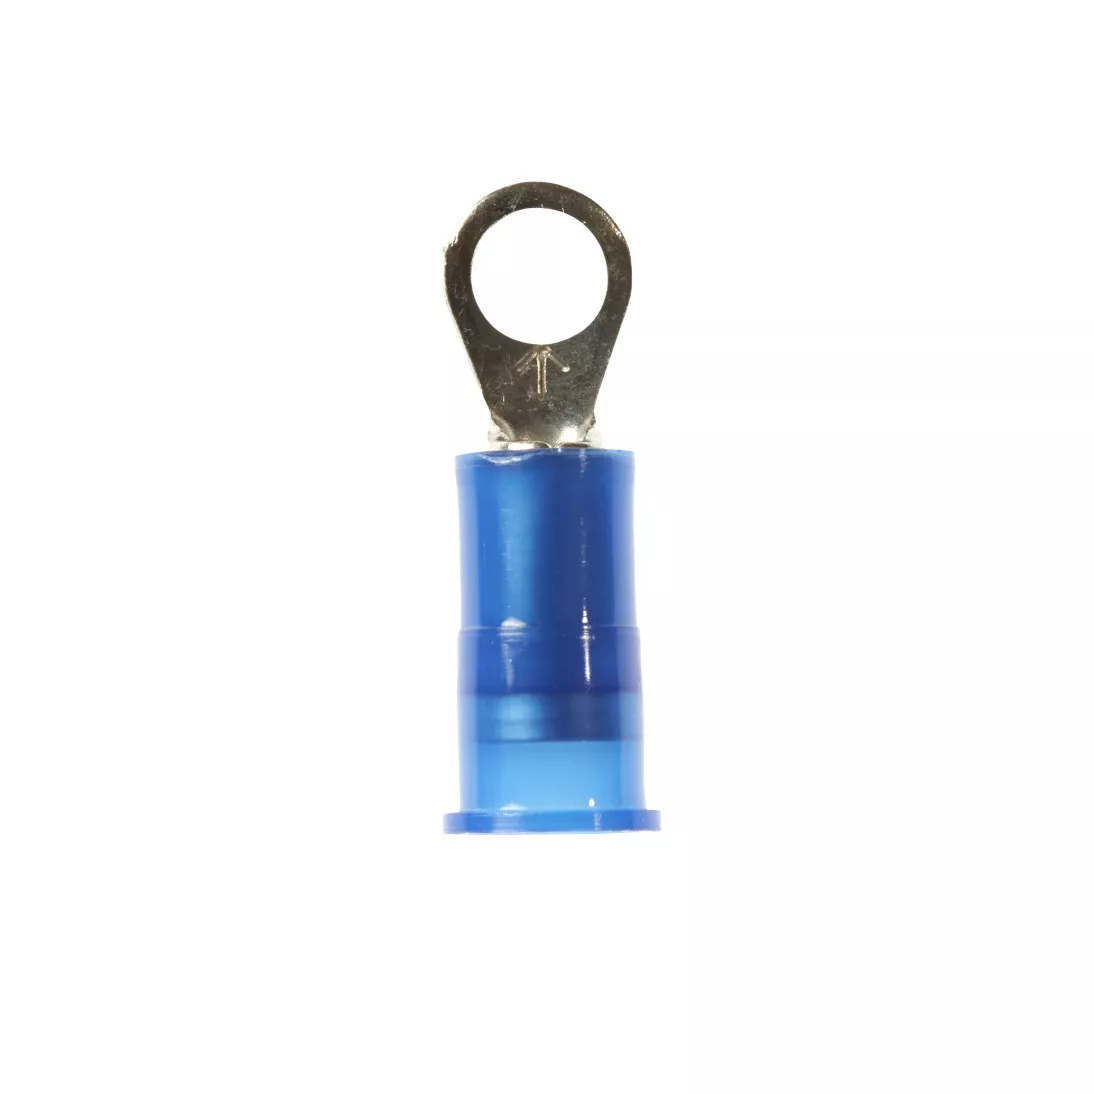 3M™ Scotchlok™ Ring Tongue, Nylon Insulated w/Insulation Grip
MNG14-8R/SK, Stud Size 8, 1000/Case